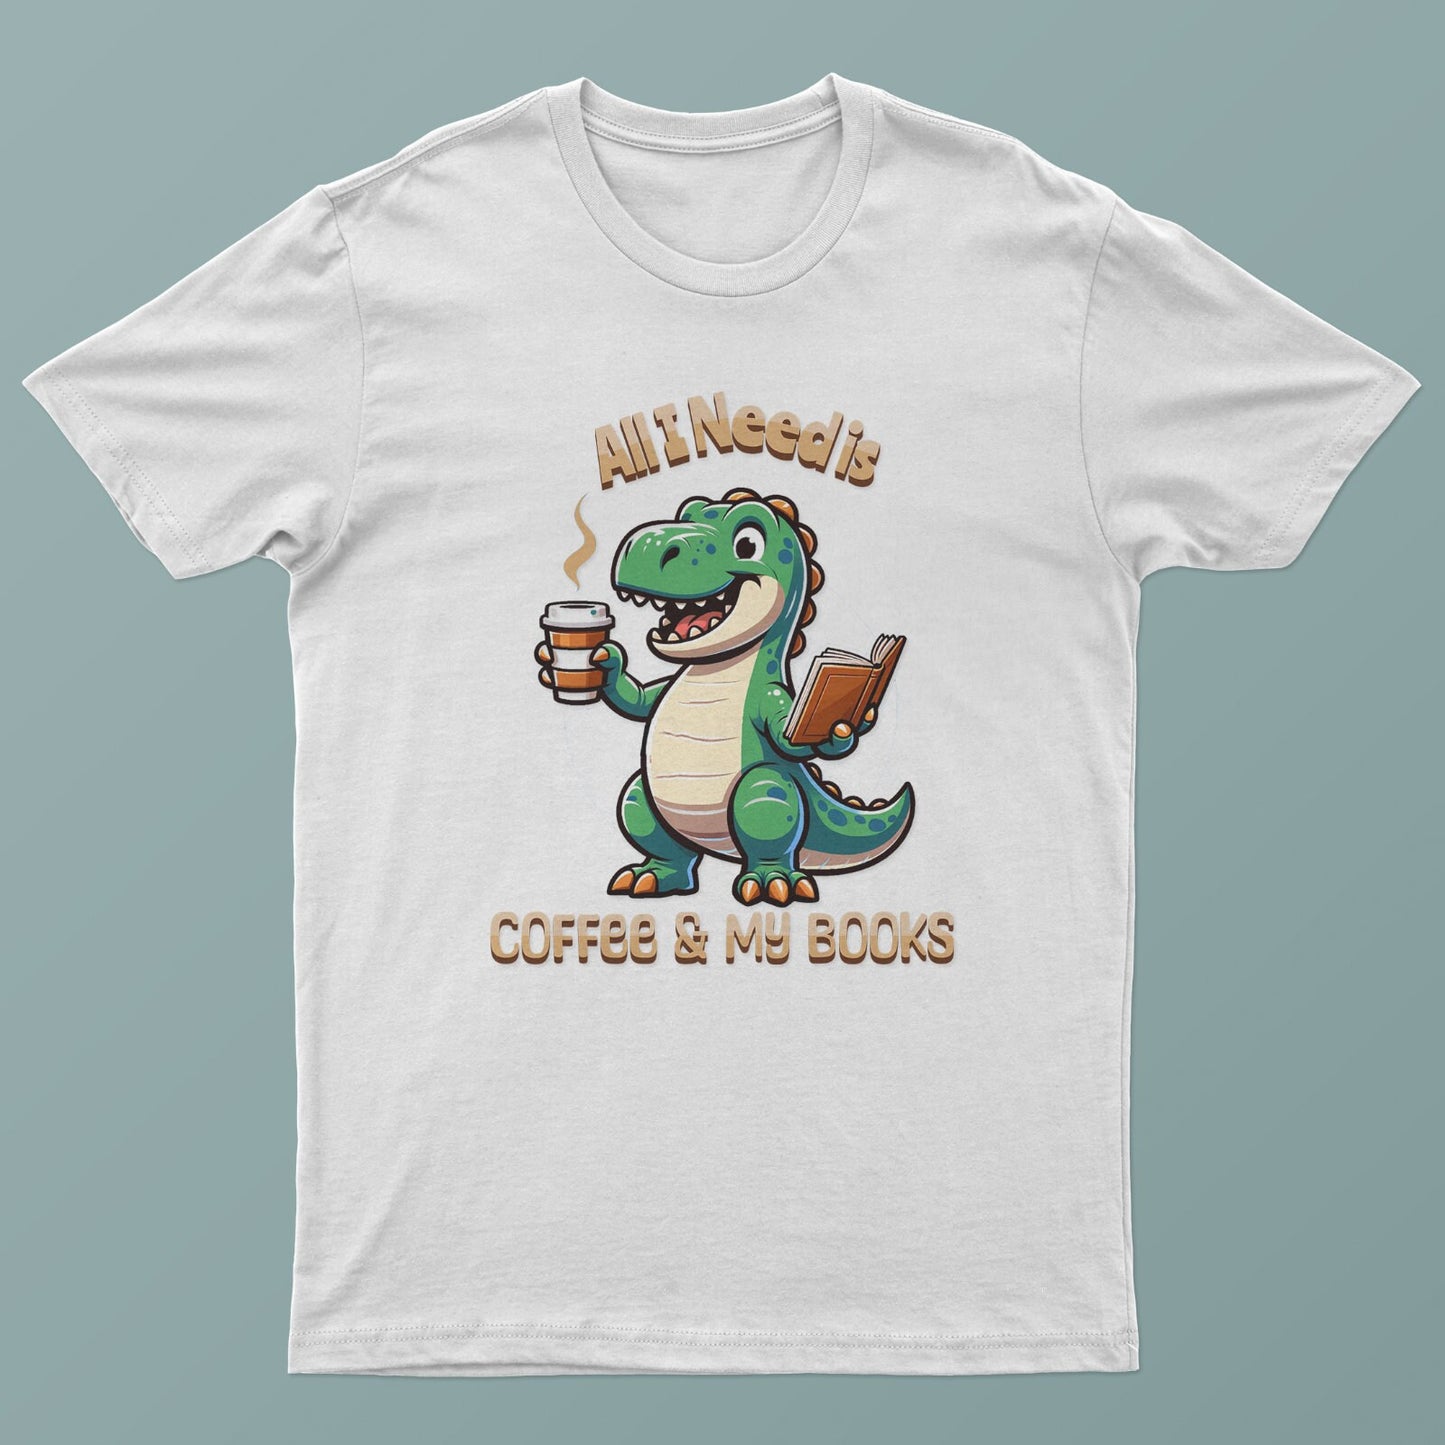 All I Need is Coffee and My Books Unisex Funny T-Rex Dinosaur T-Shirt